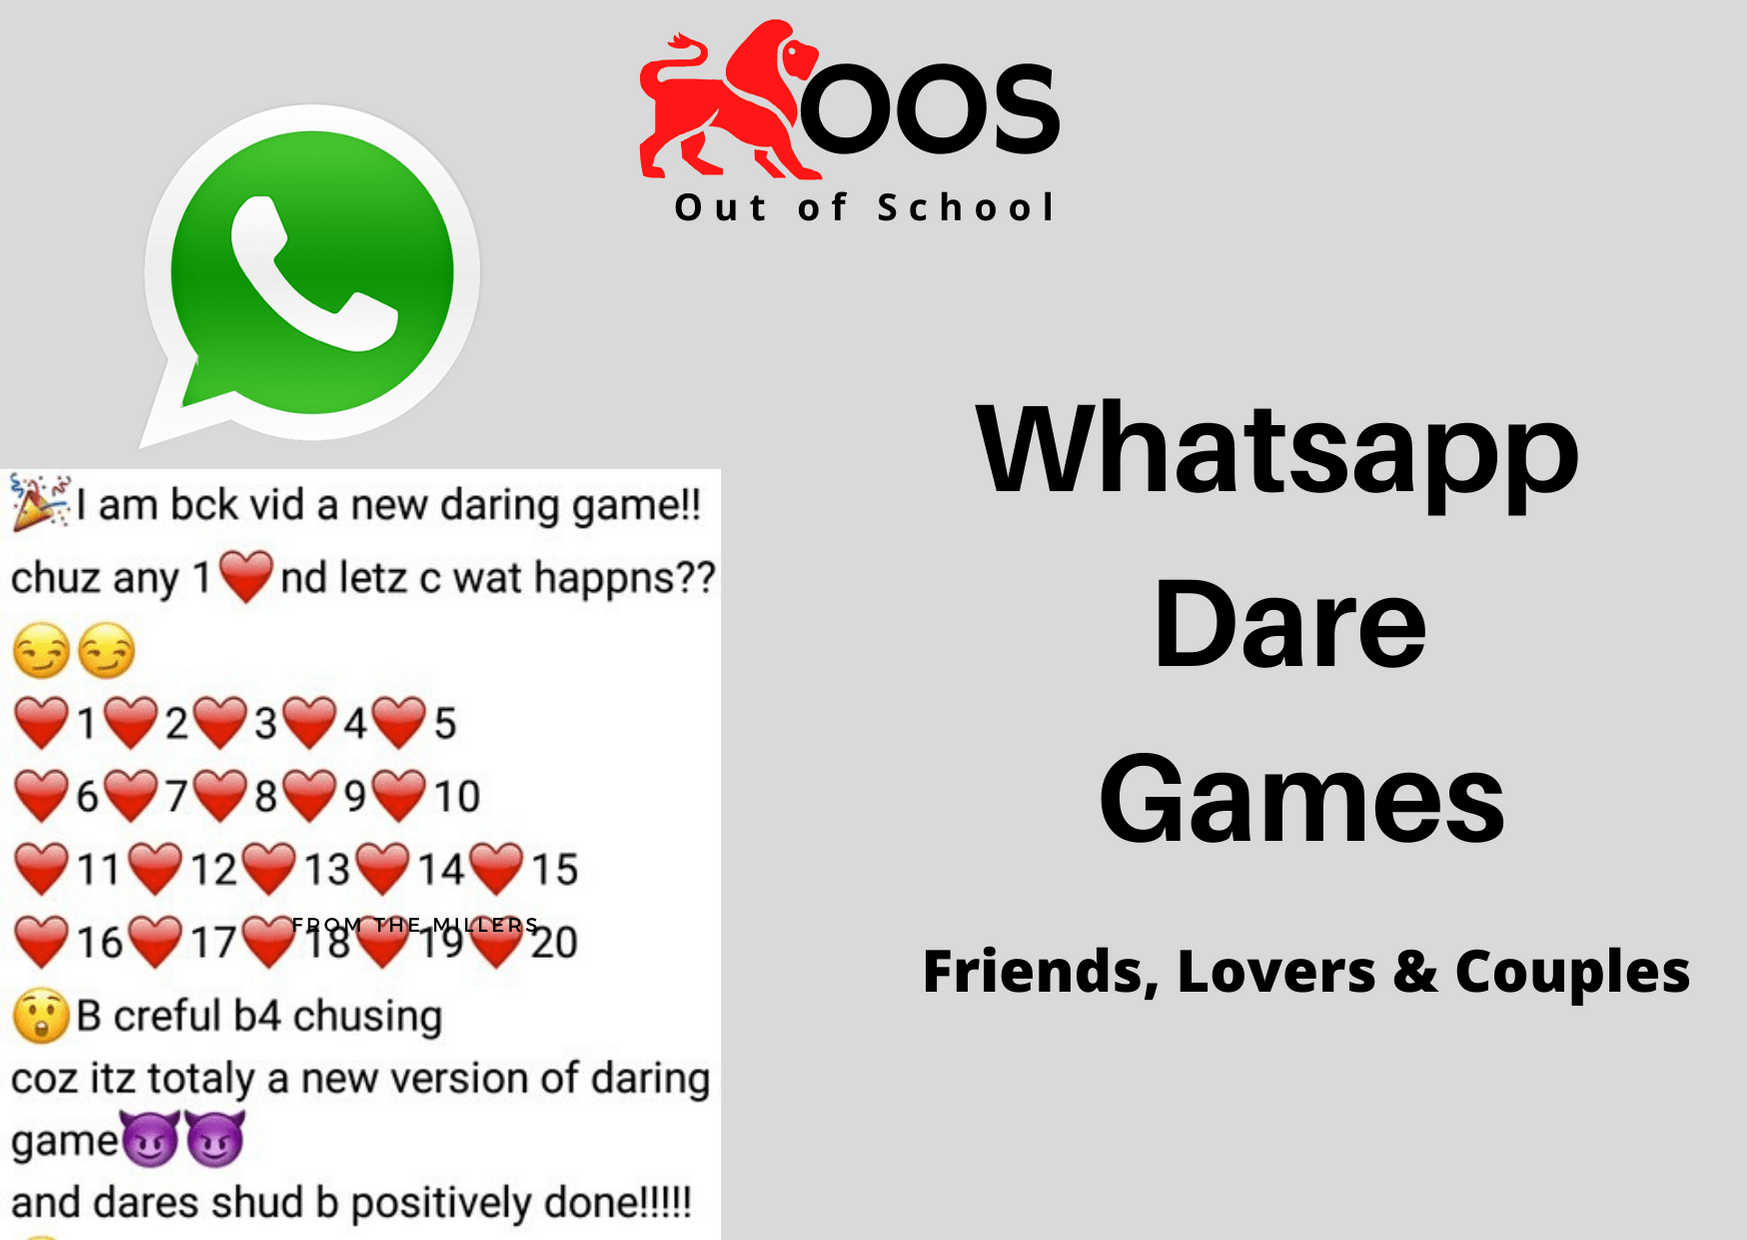 200+ Whatsapp Dare Games - Friends, Lovers & Couples